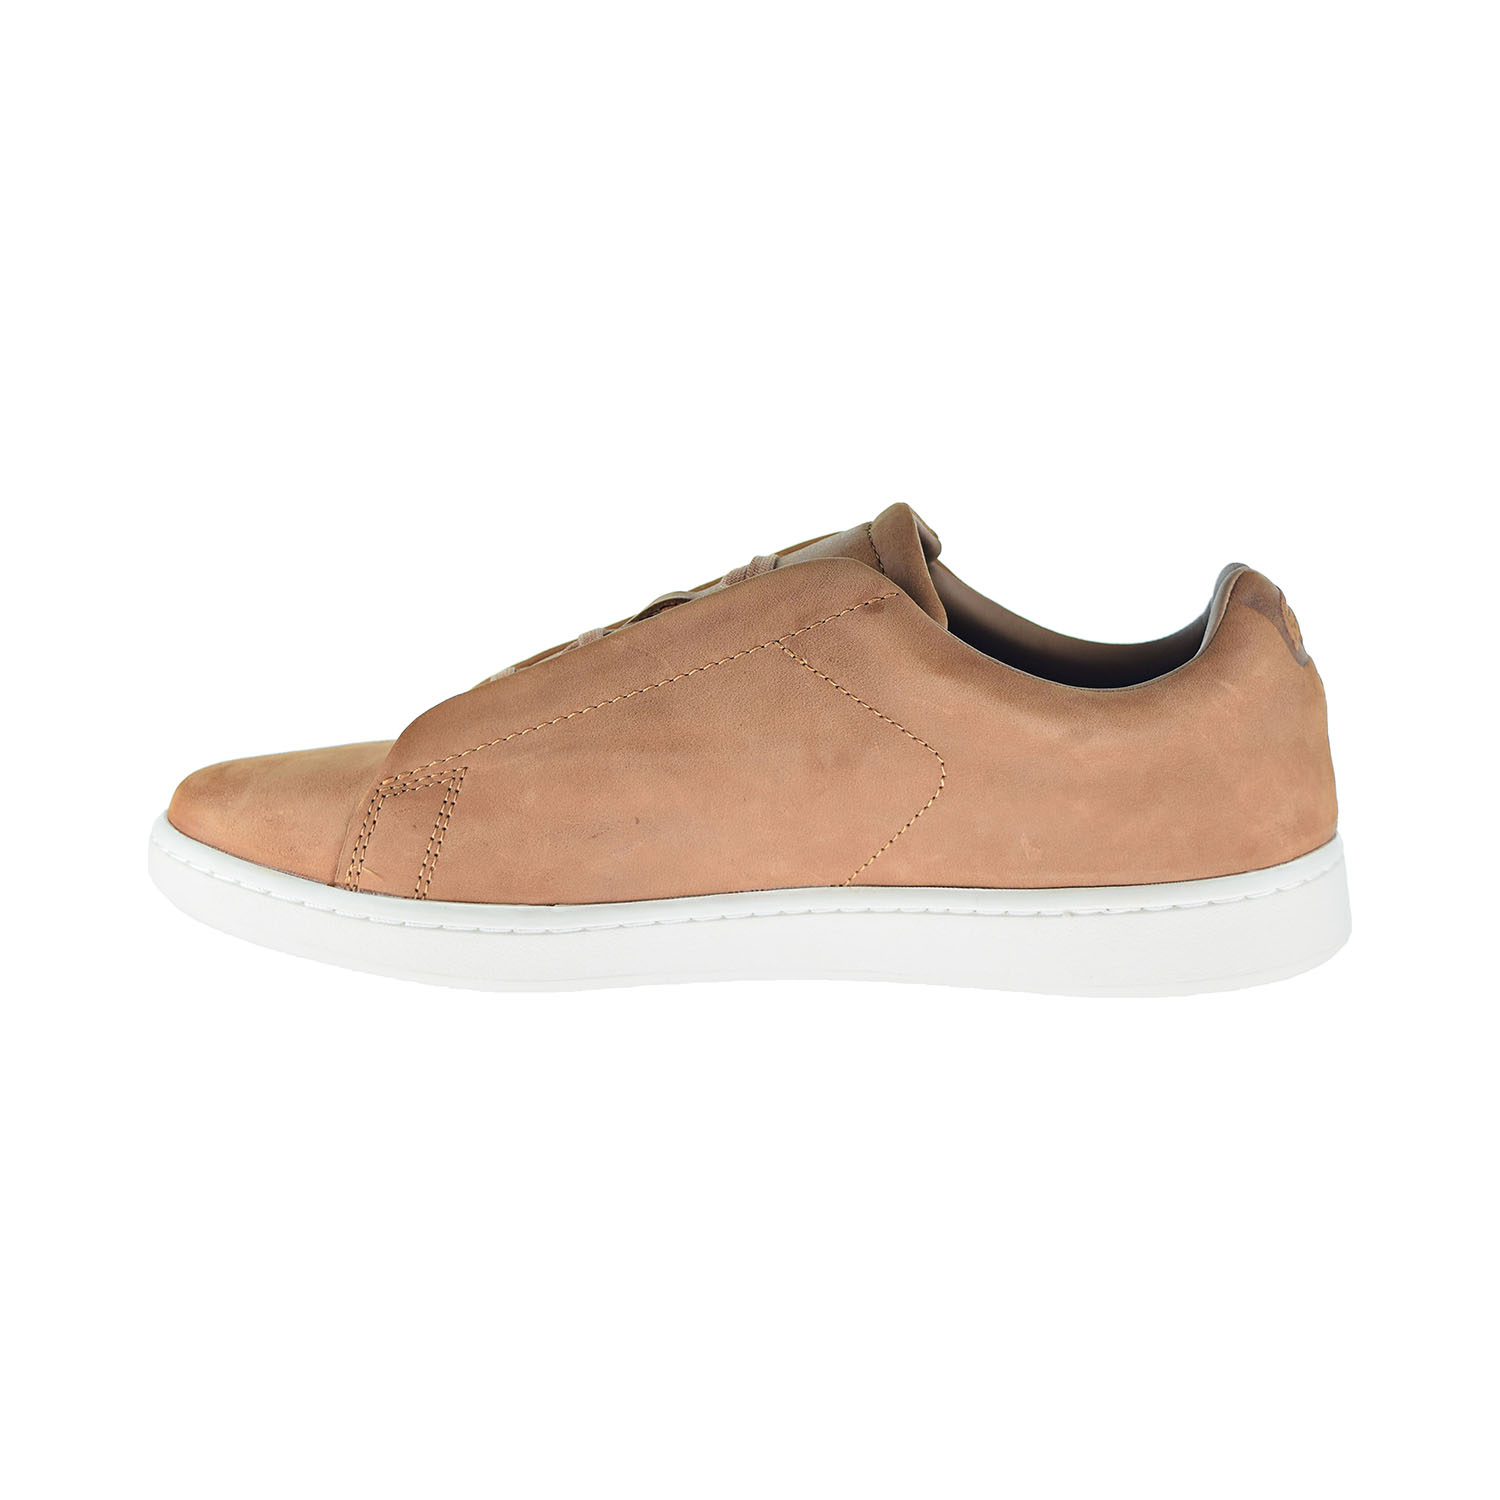 Lacoste Carnaby Evo Easy 319 1 SMA Men's Shoes Brown/Off White 7-38sma0015-2c3 - image 4 of 6